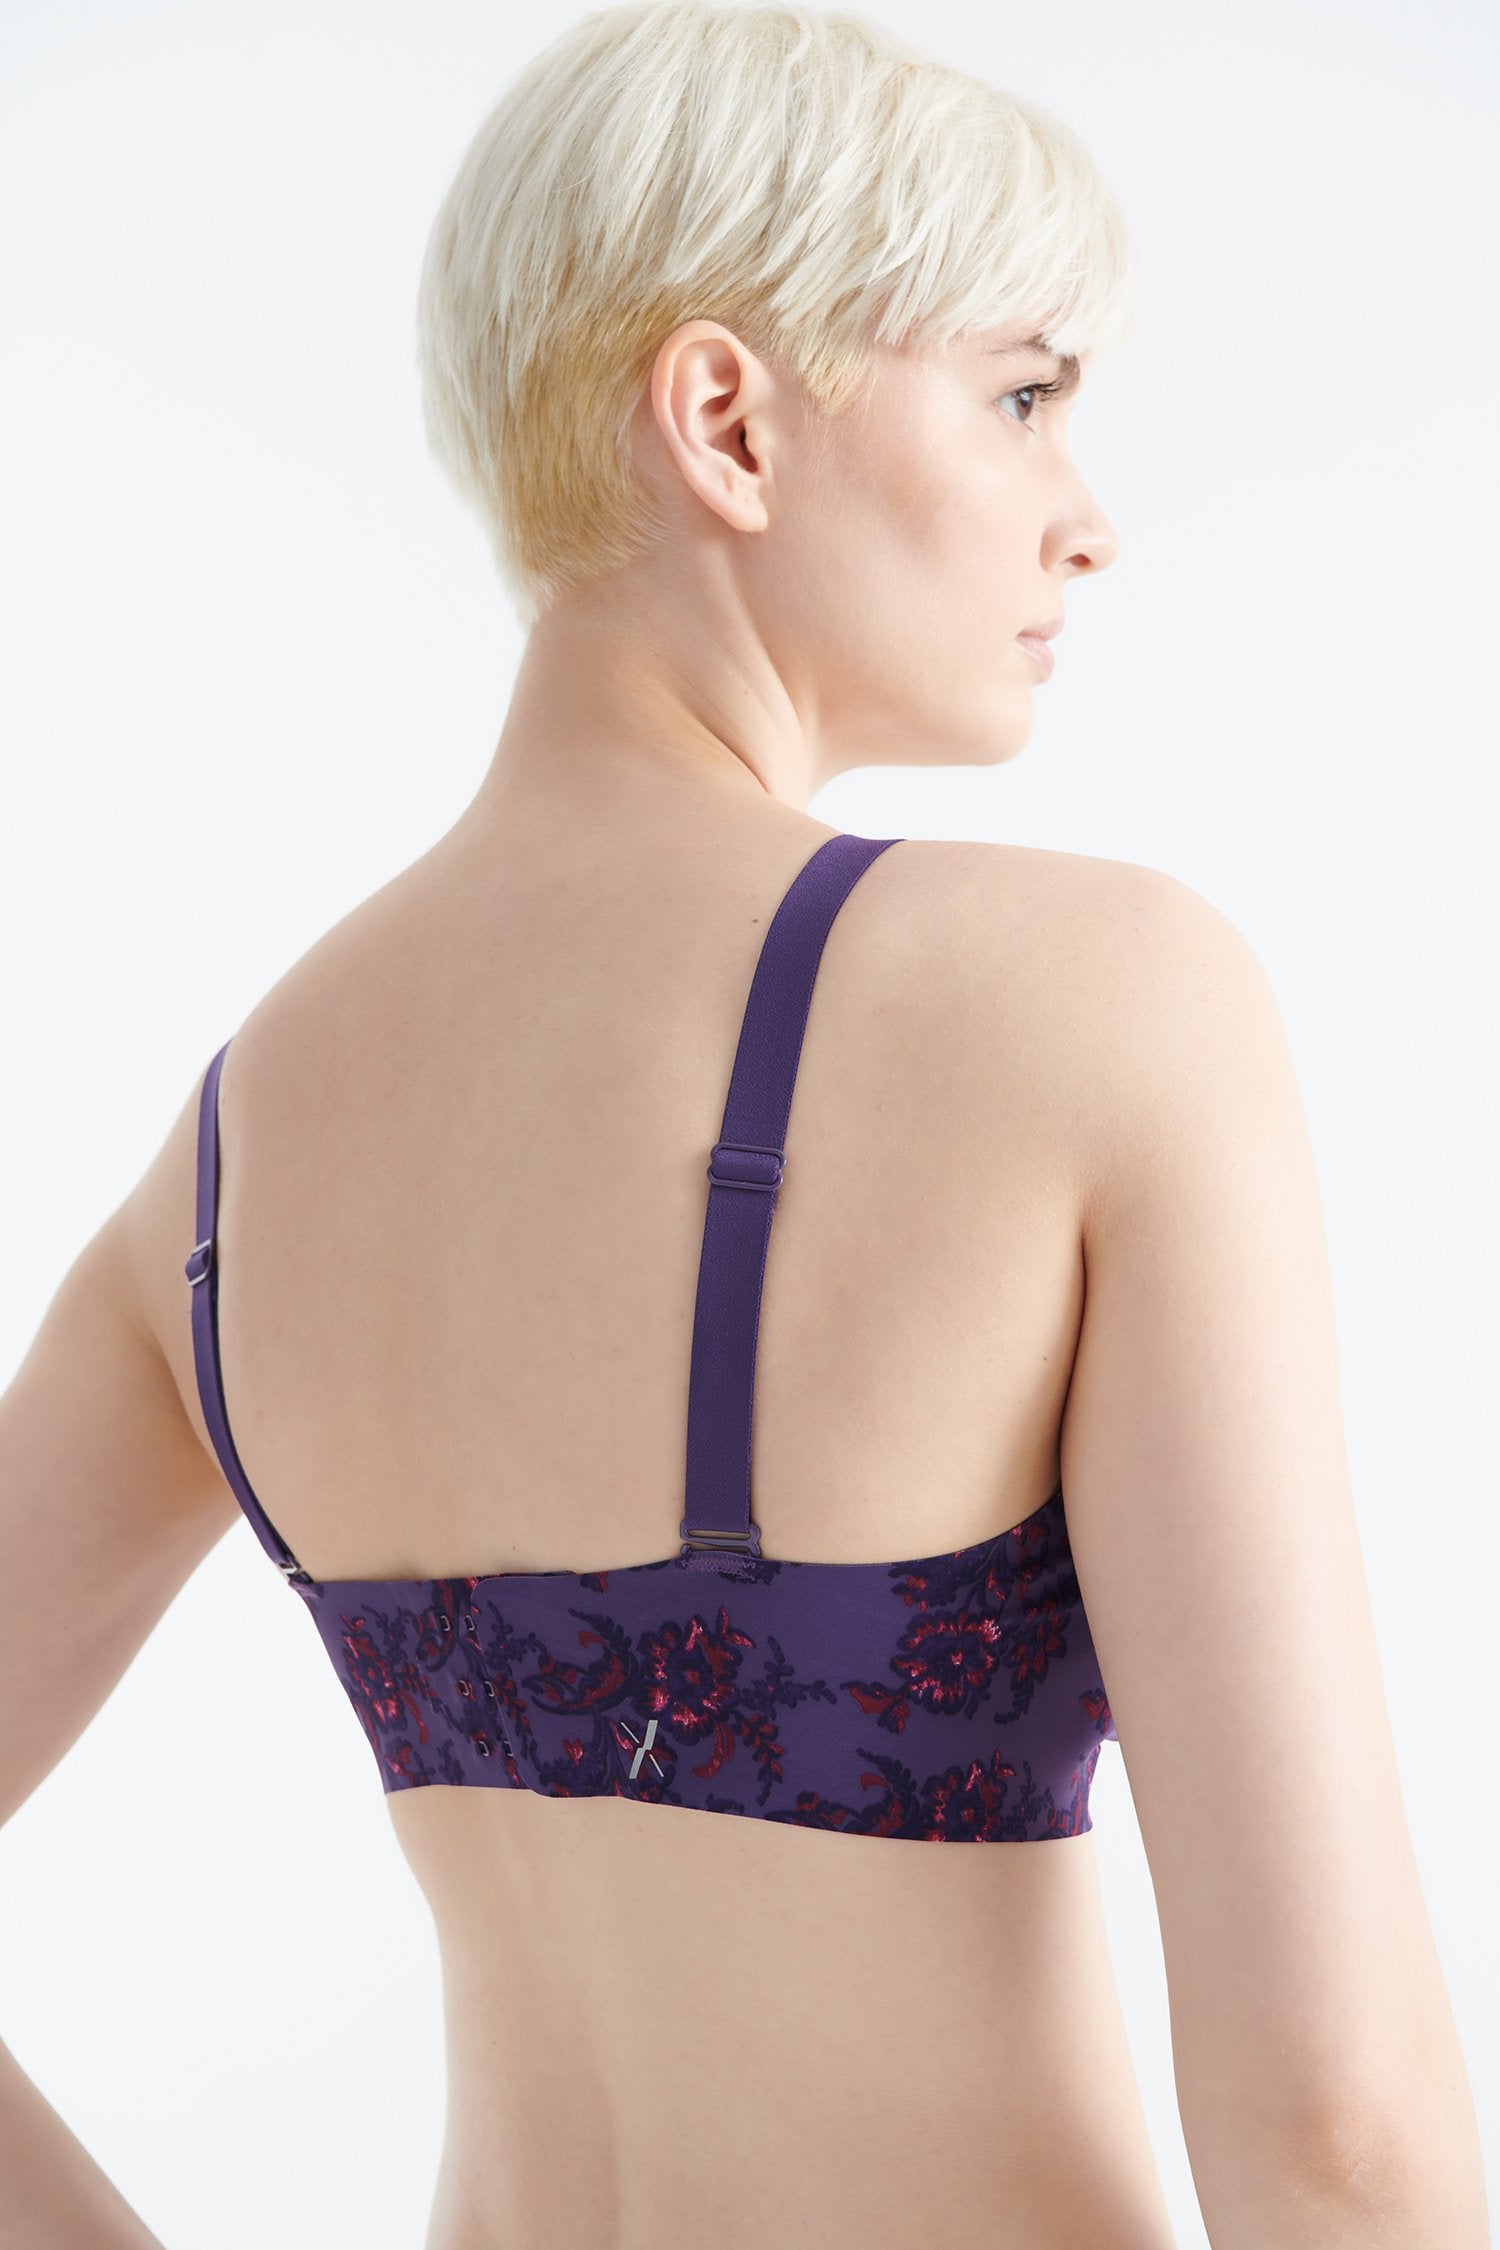 A large band in the back with hooks to adjust it to your bust, and the straps also have an adjustment system